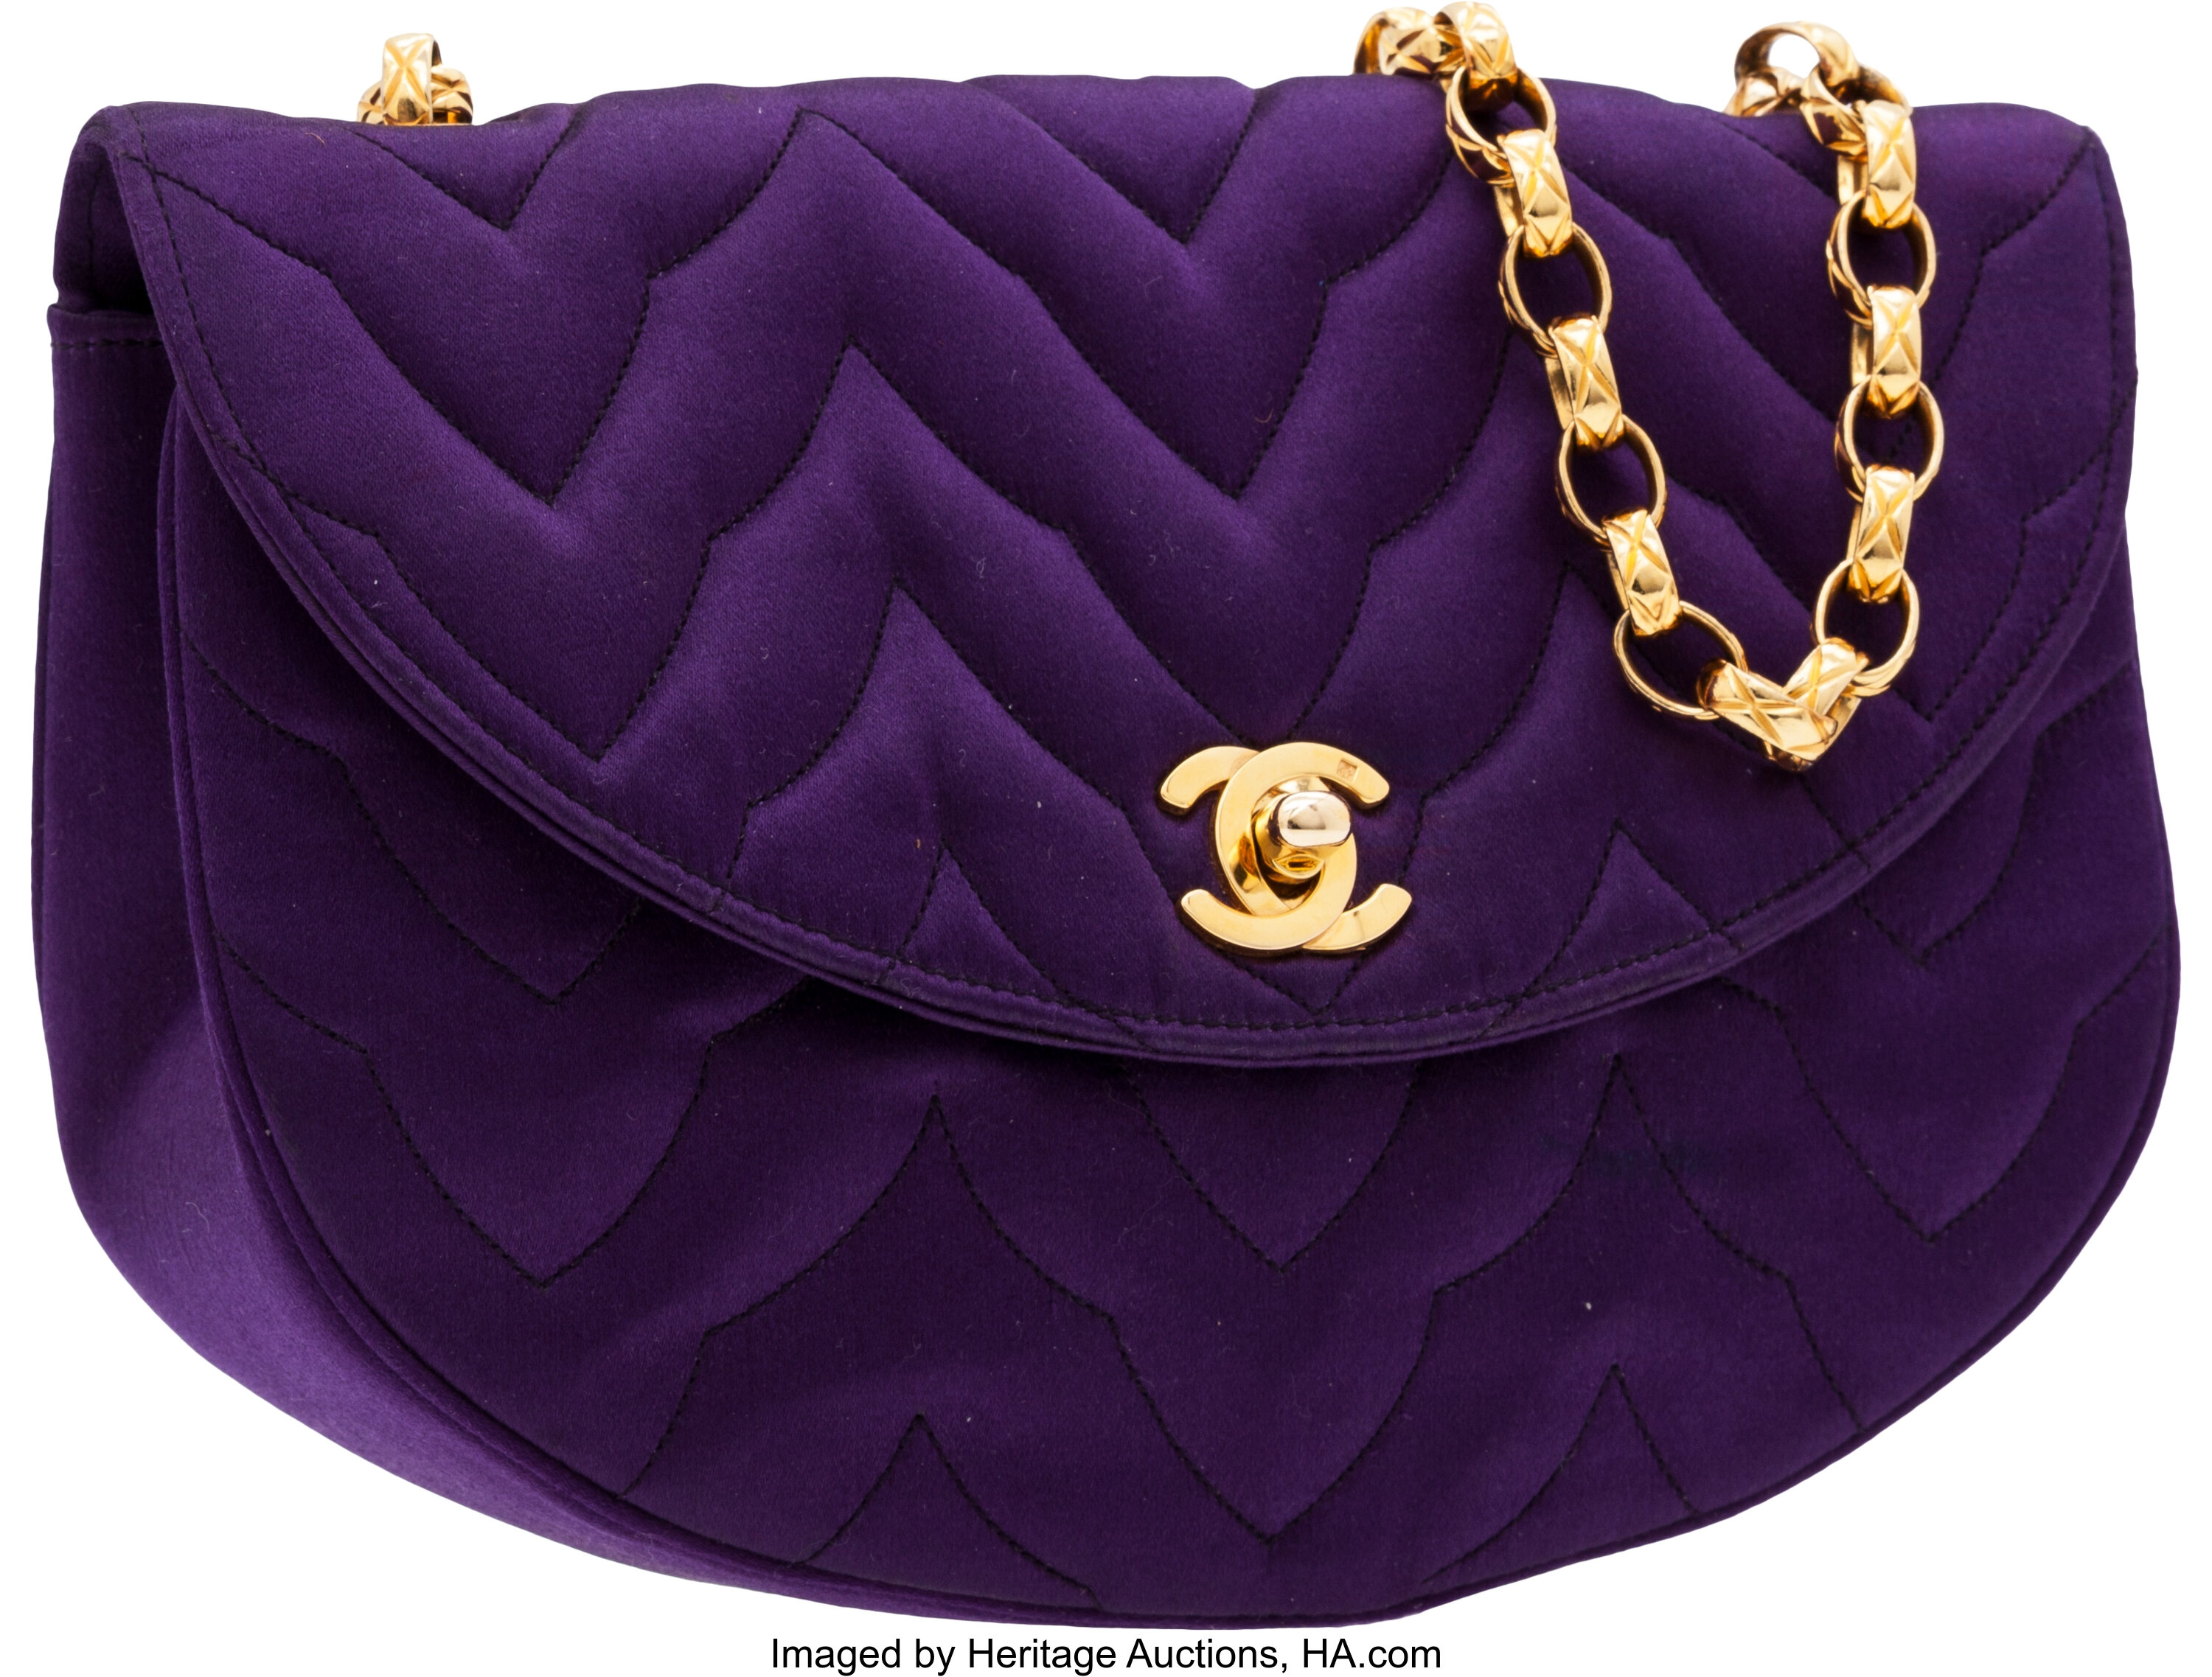 Chanel Deep Purple Satin Quilted Evening Bag with Gold Chain Strap., Lot  #56673